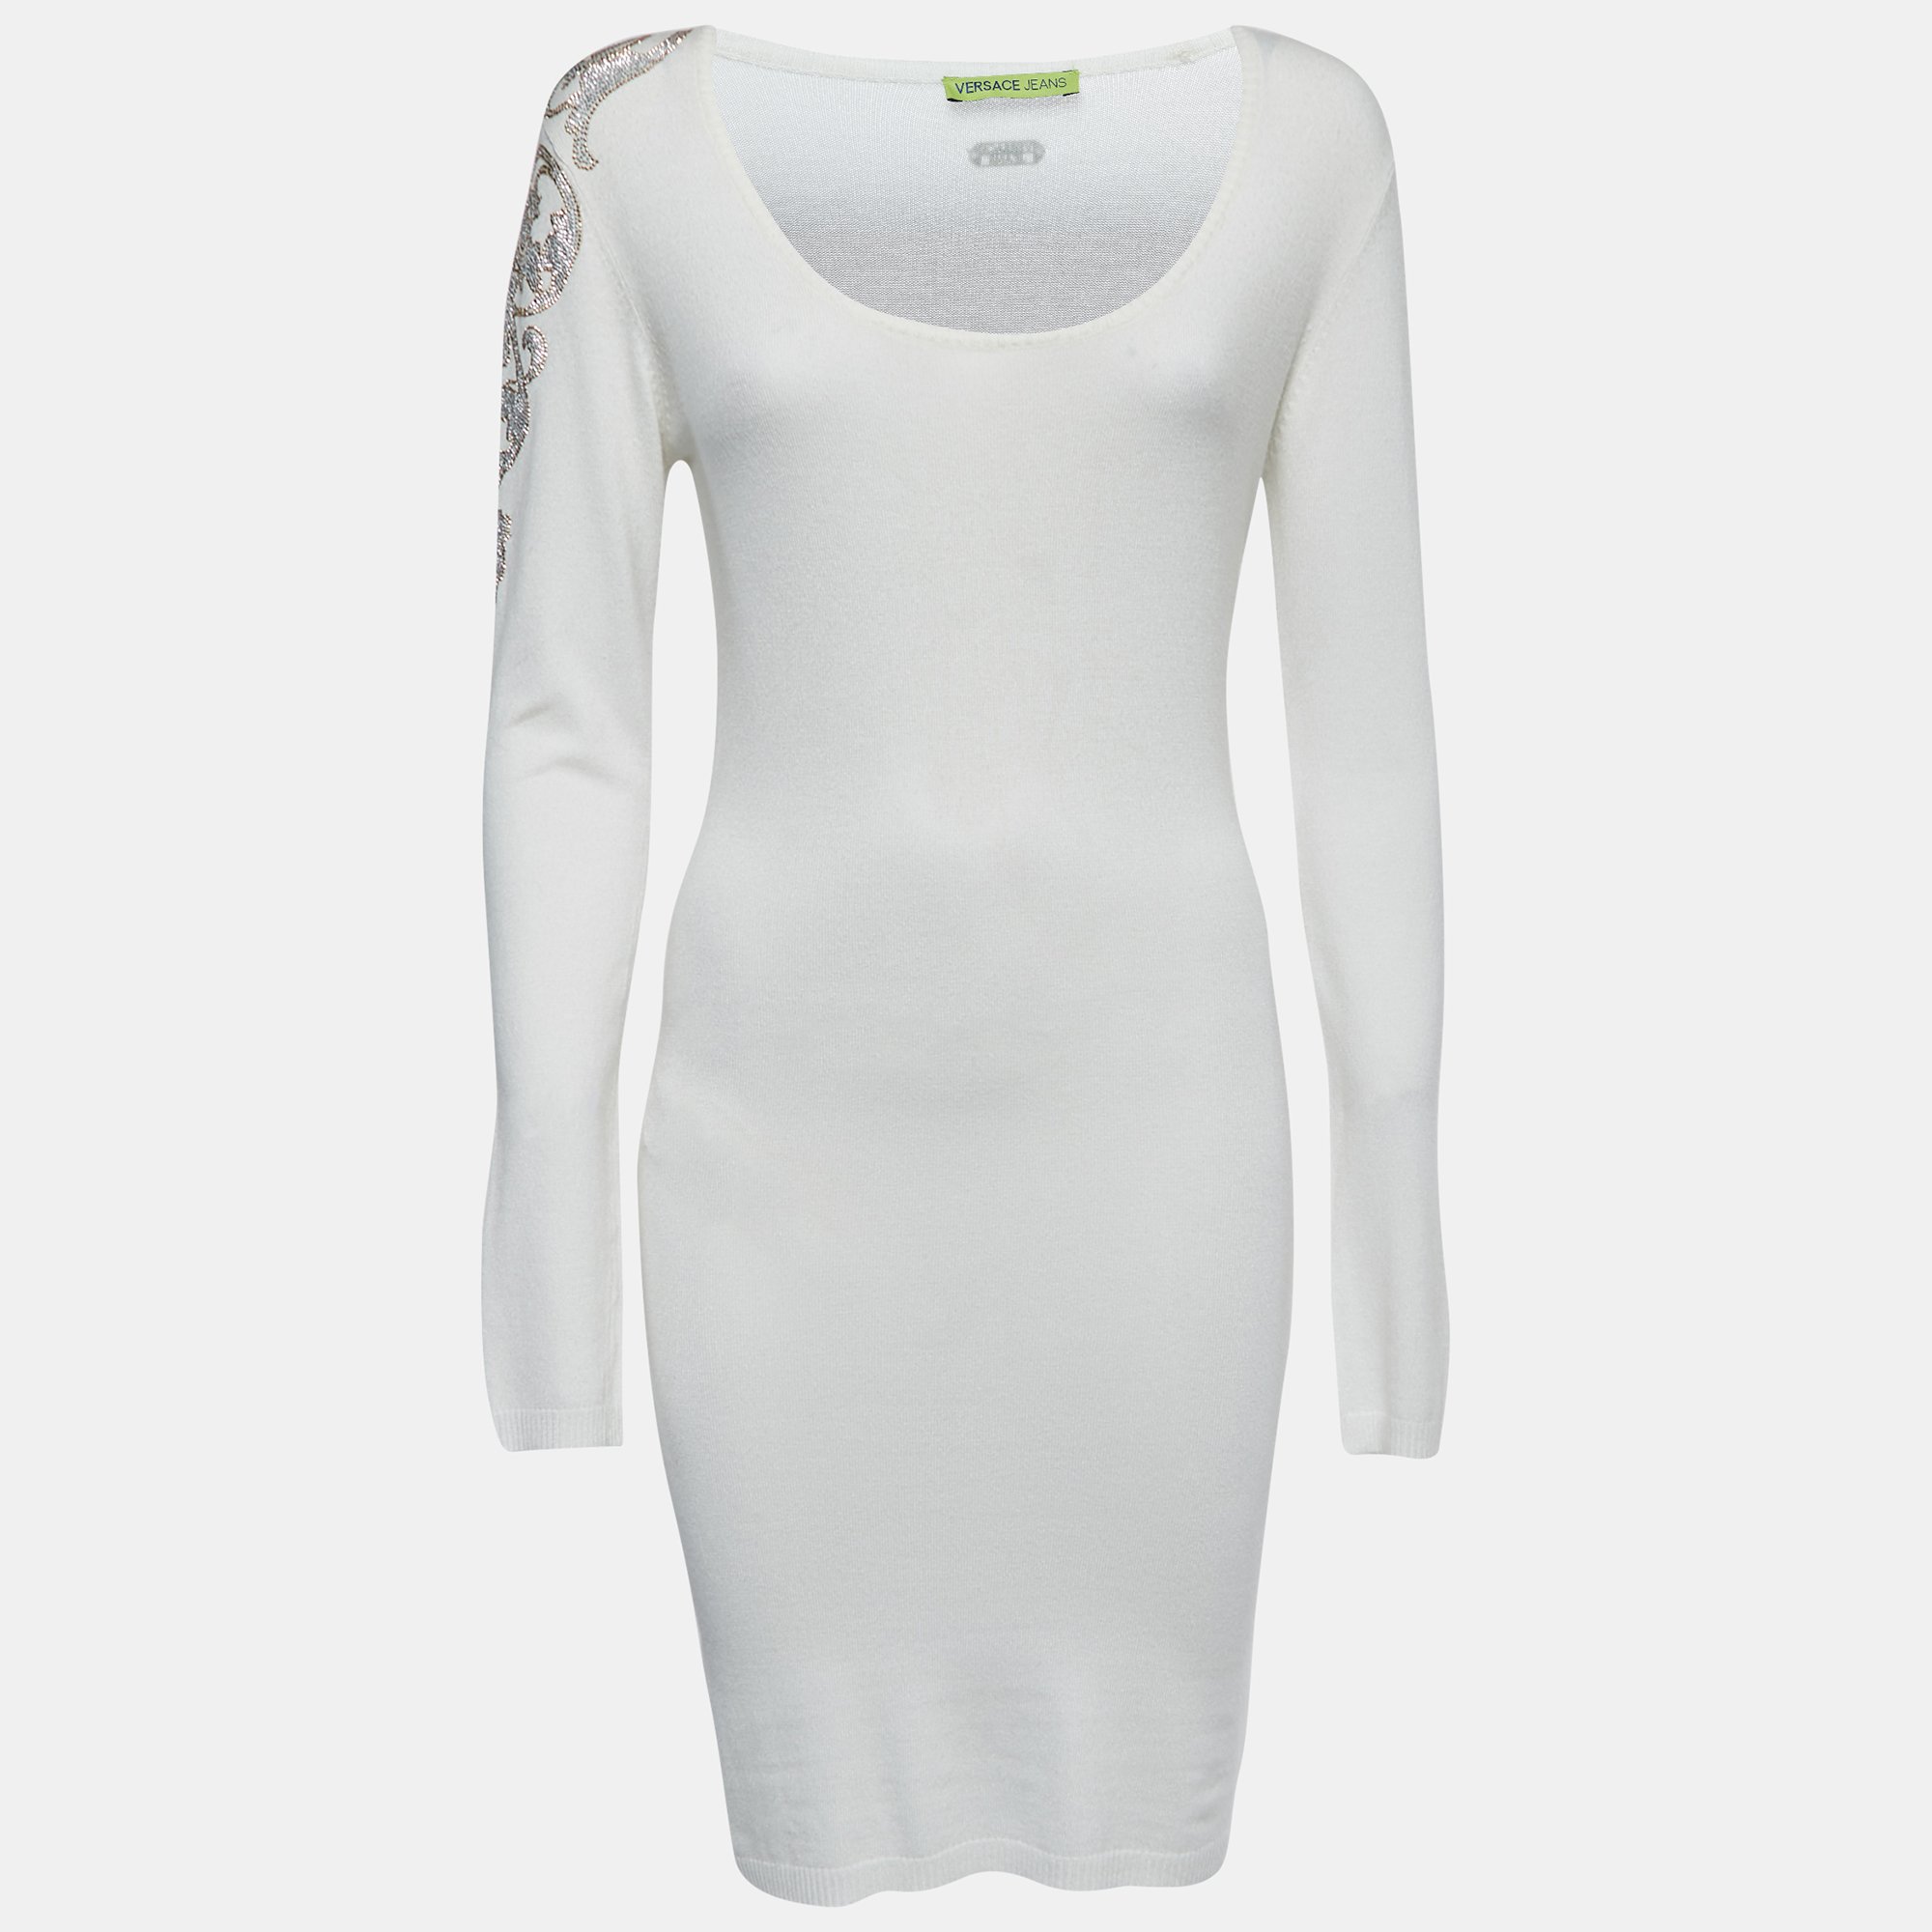 

Versace Jeans White Knit Embellished Long Sleeve Bodycon Dress